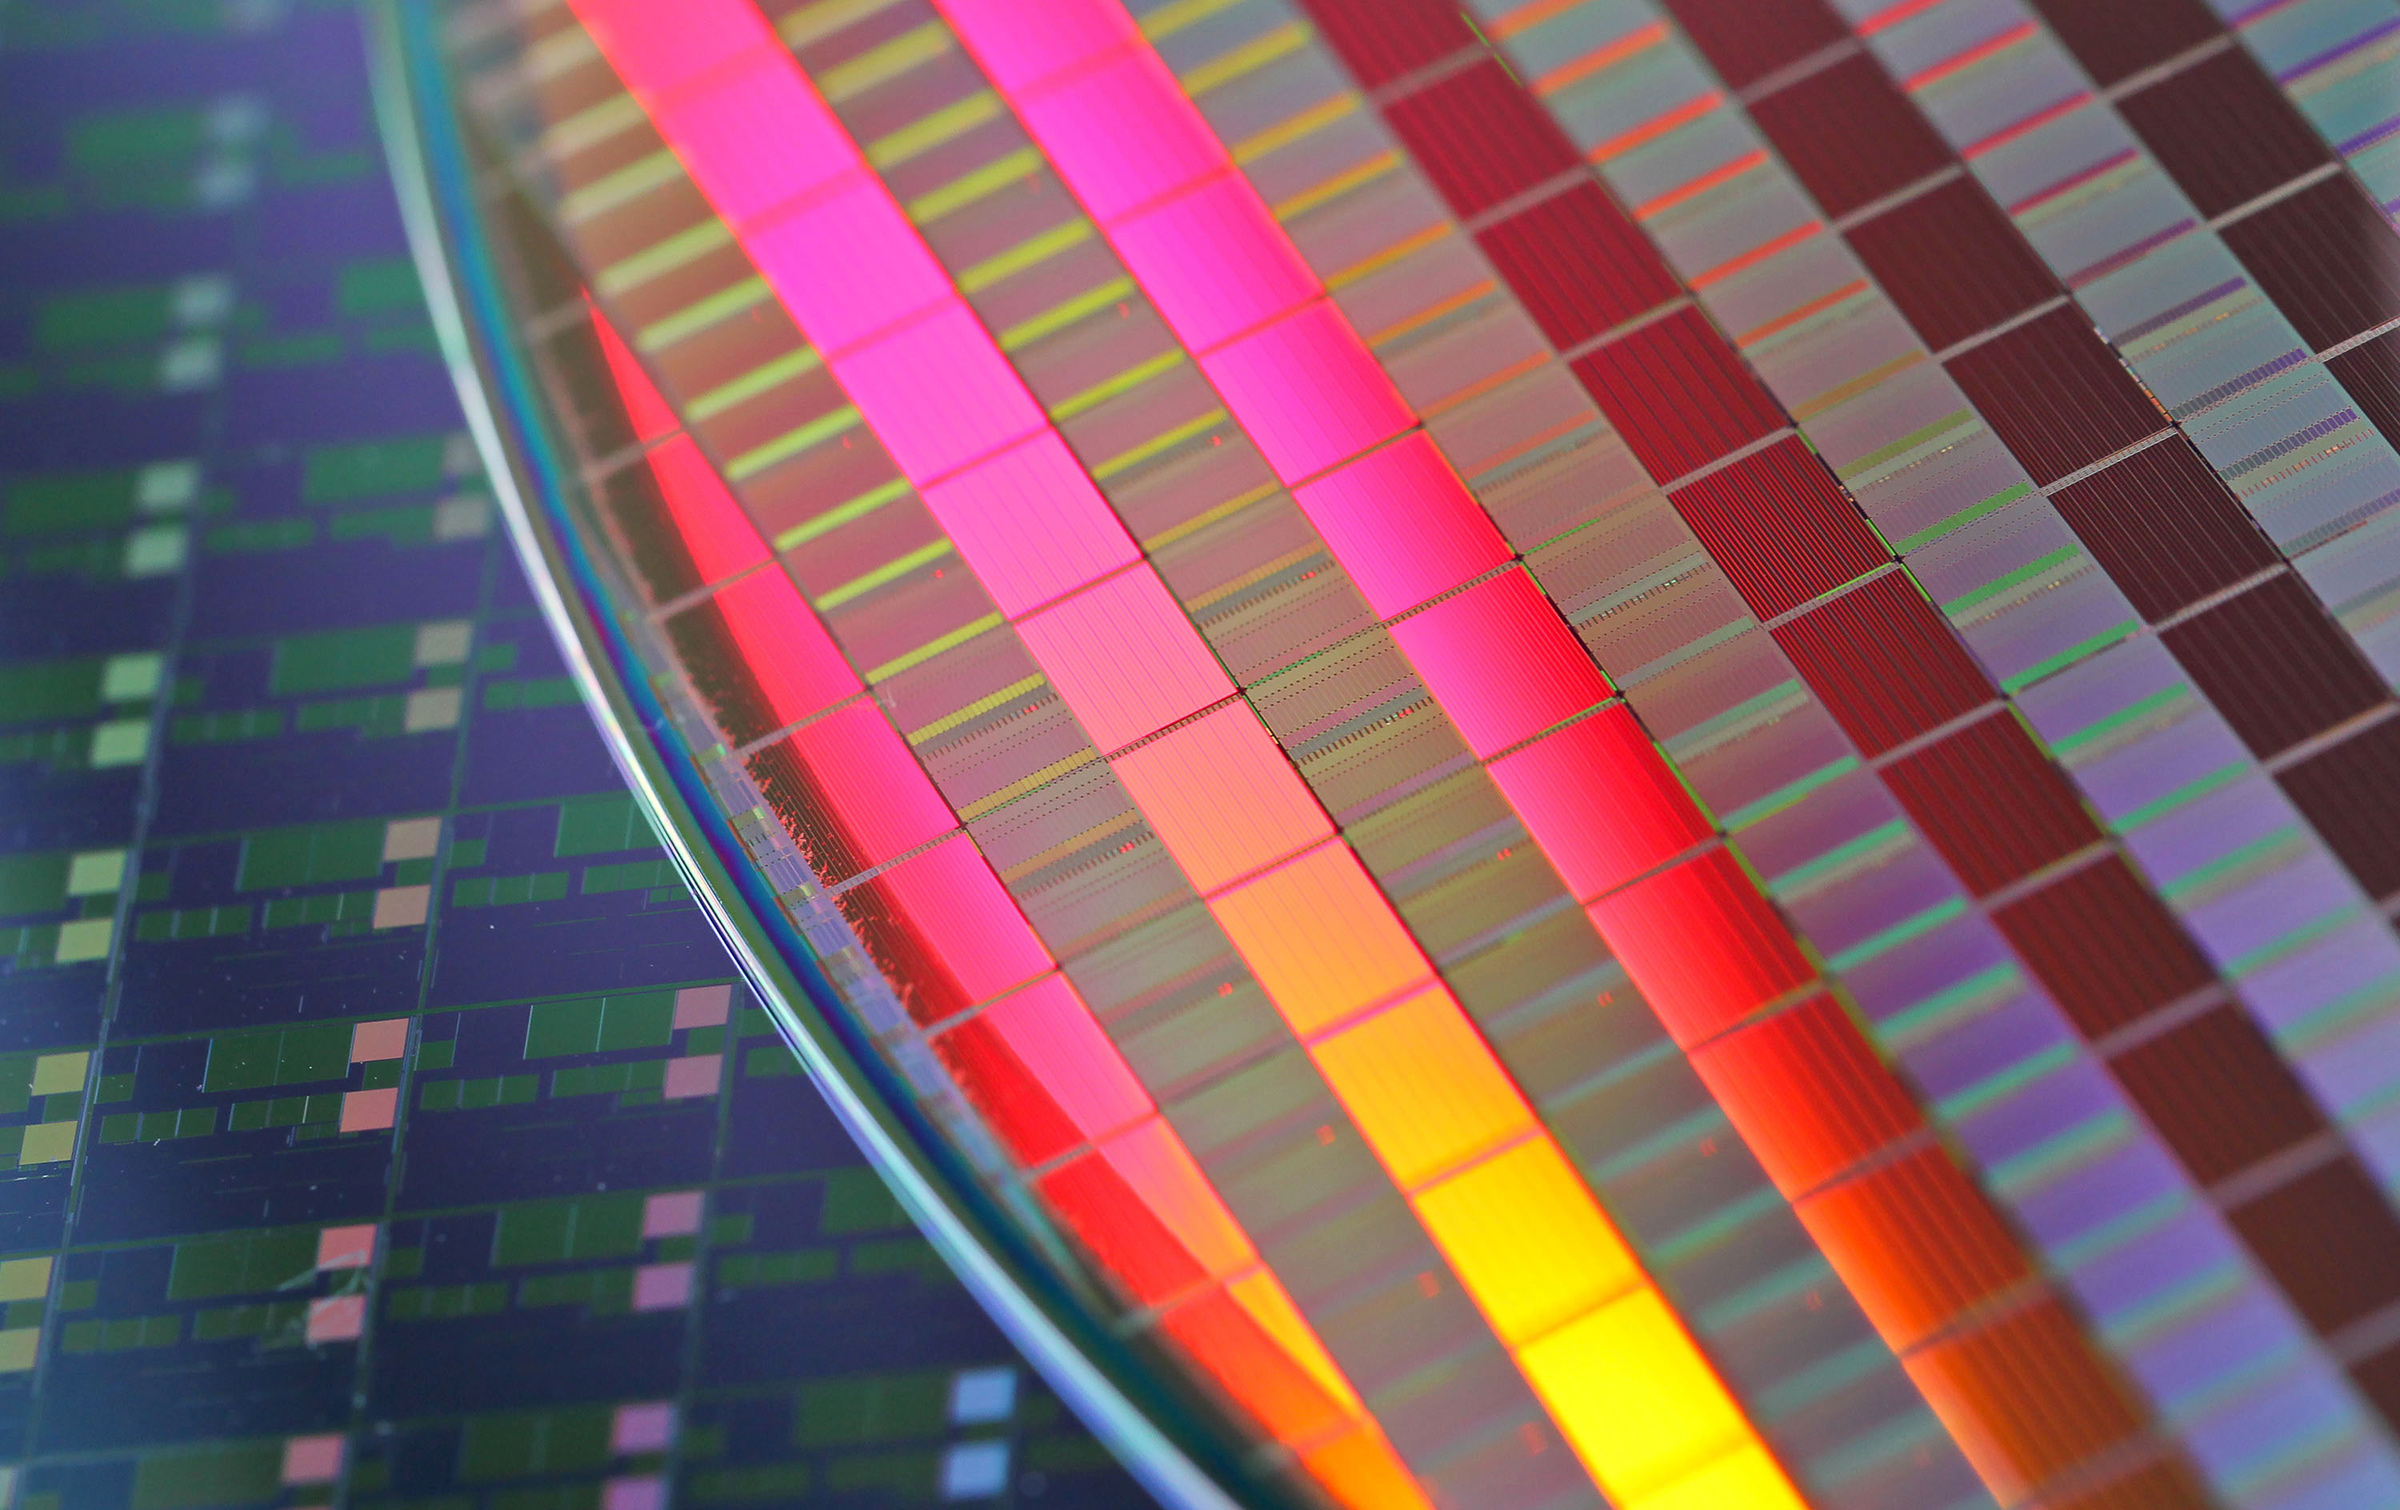 Silicon wafers made by Taiwan Semiconductor Manufacturing Co. at the company's headquarters in Hsinchu, Taiwan. (Maurice Tsai—Bloomberg/Getty Images)